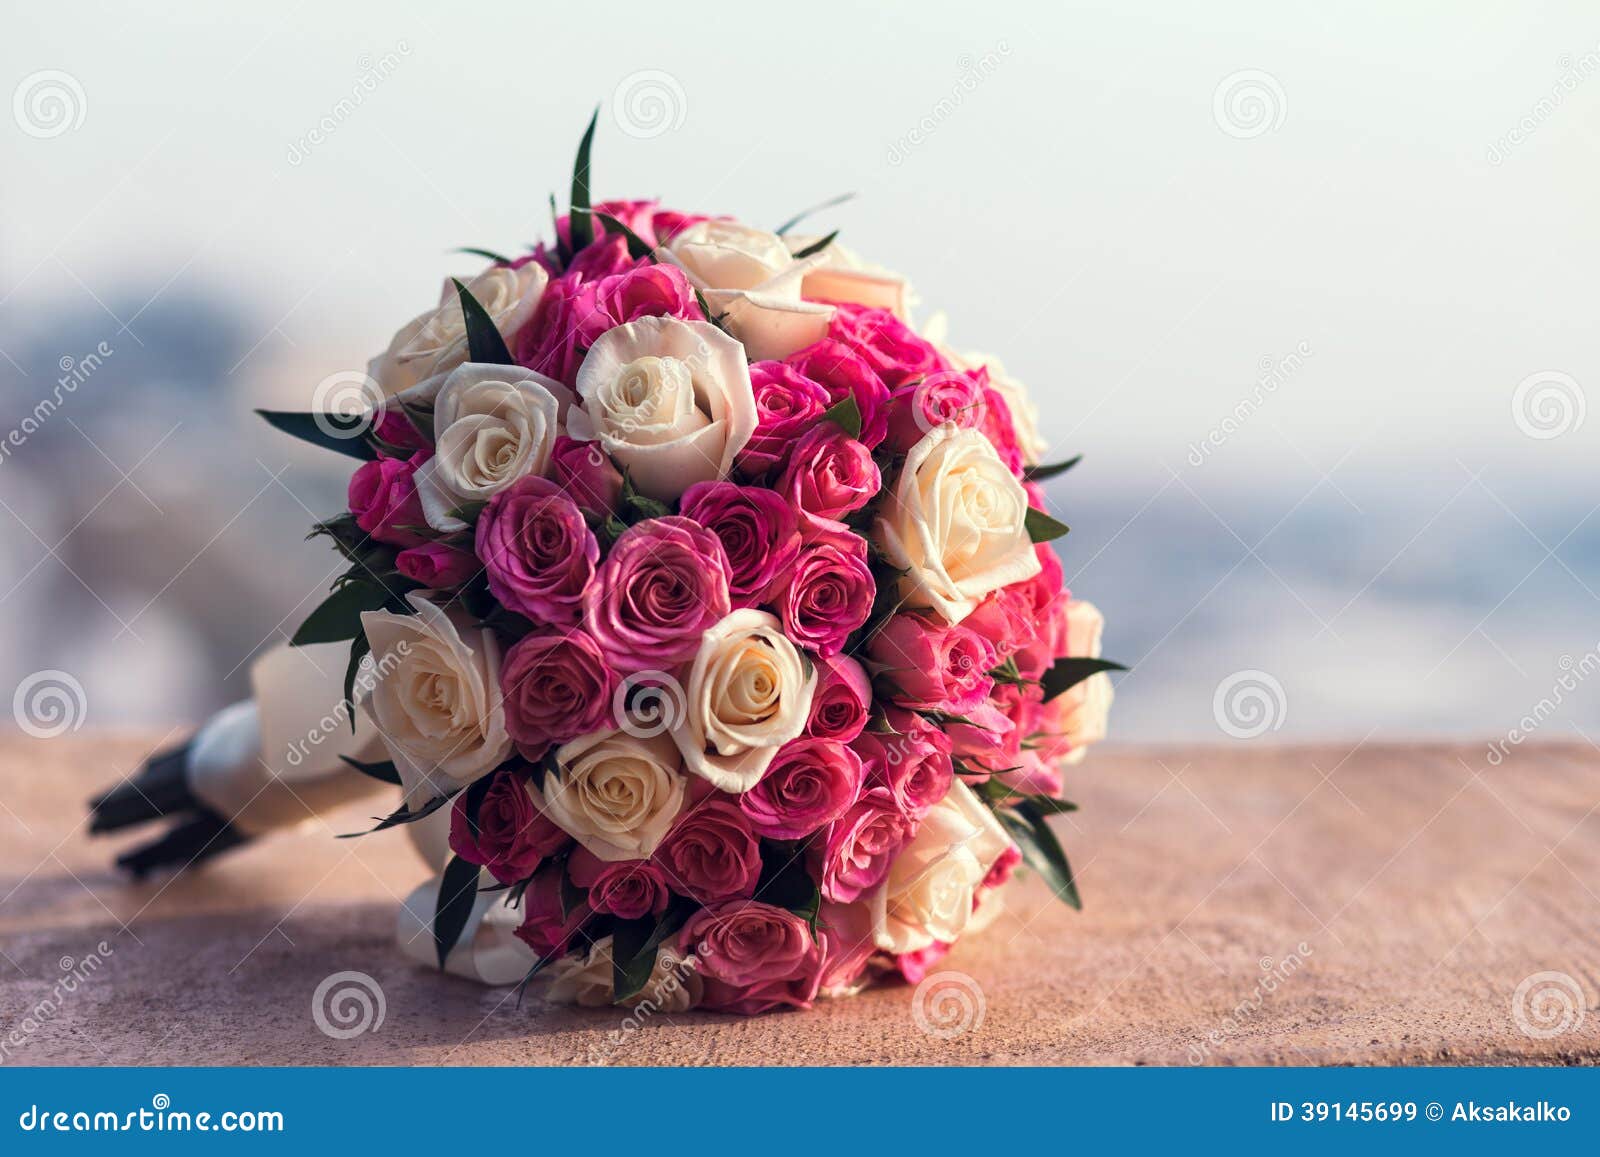 Wedding Bouquet of Red White Roses Stock Image - Image of engagement ...